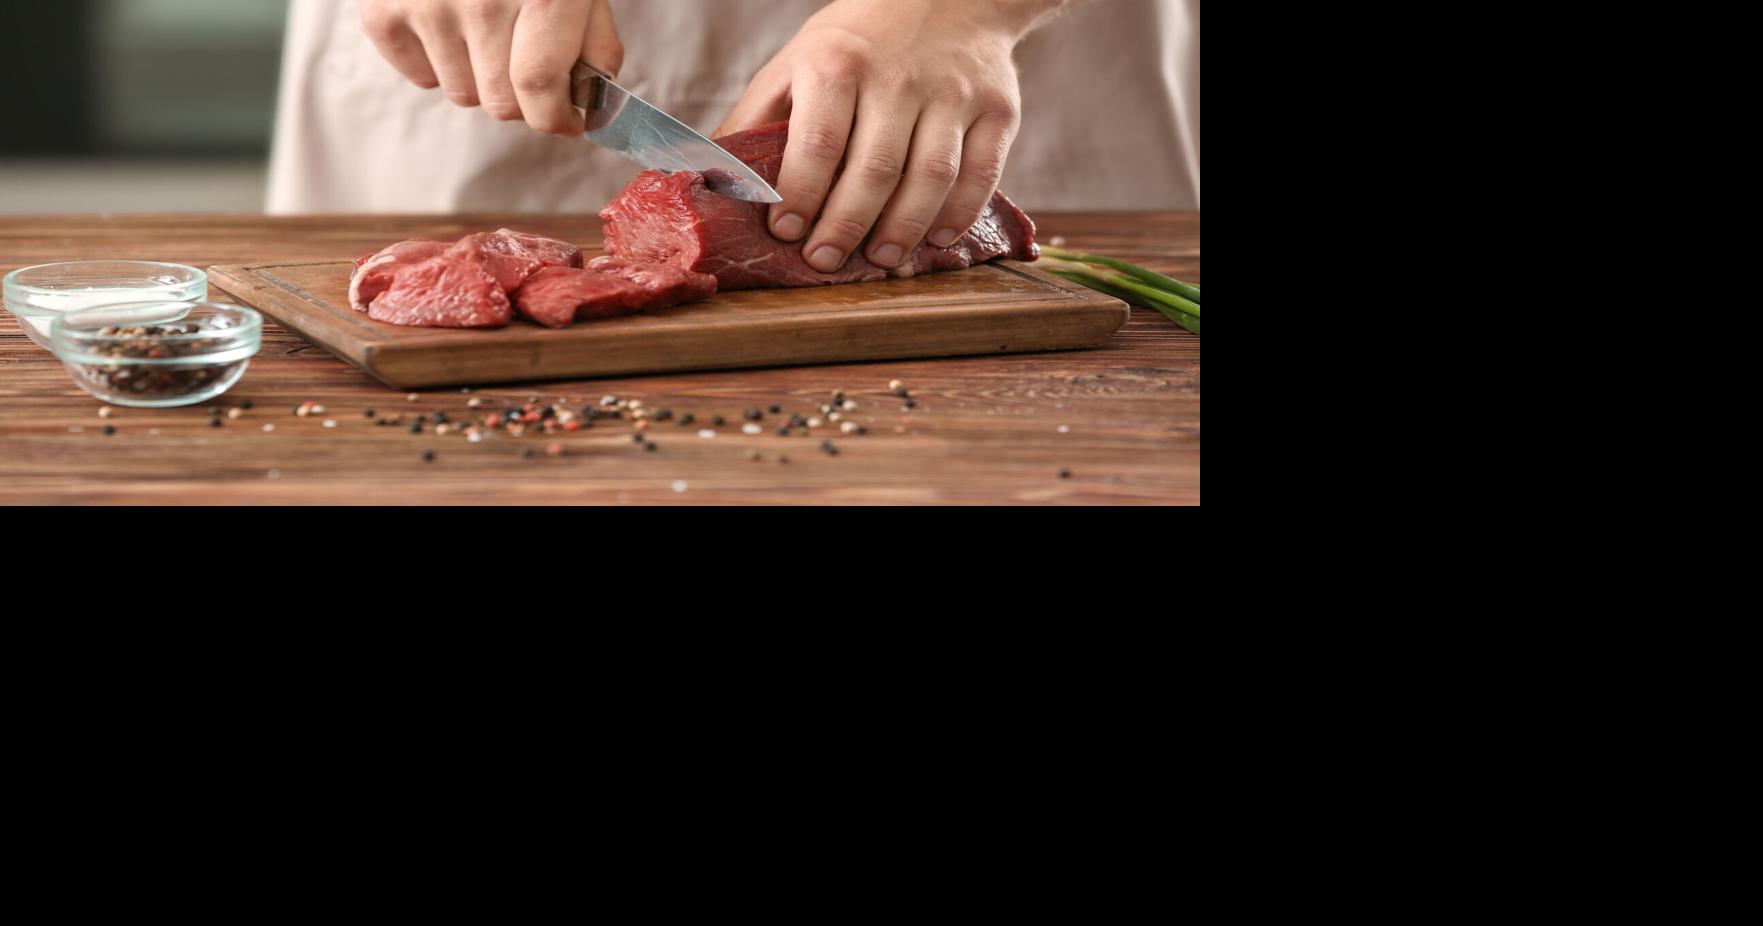 Cooking meat safely